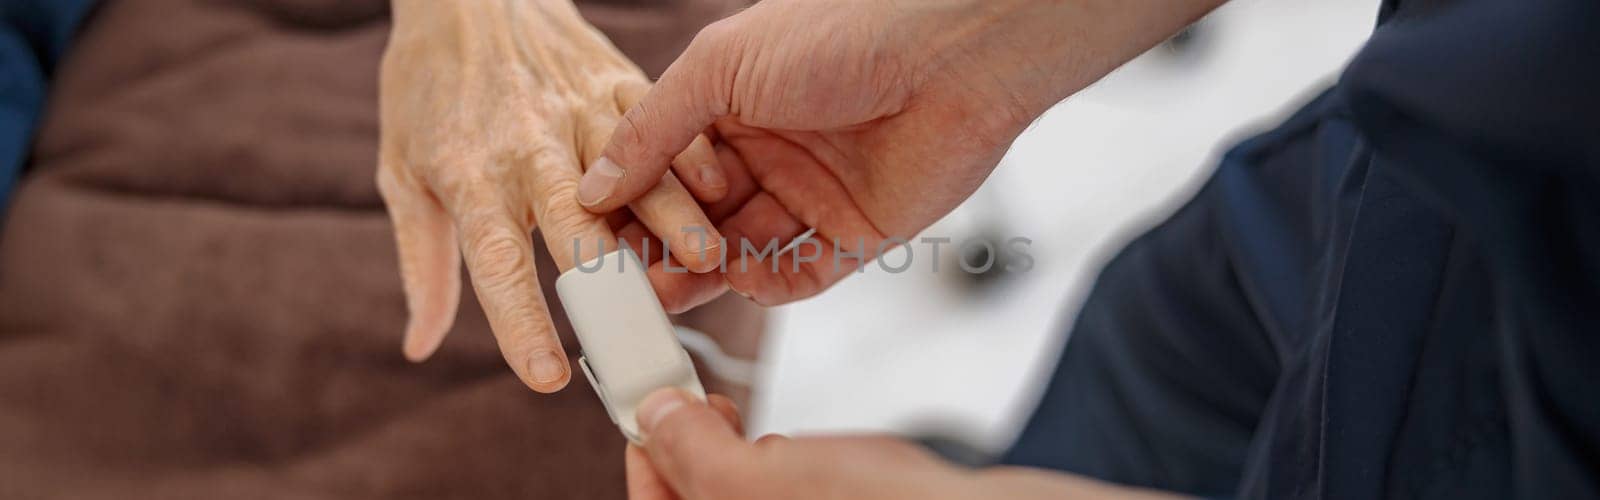 Nurse checking with fingertip pulse oximeter oxygen saturation of patient blood. High quality photo